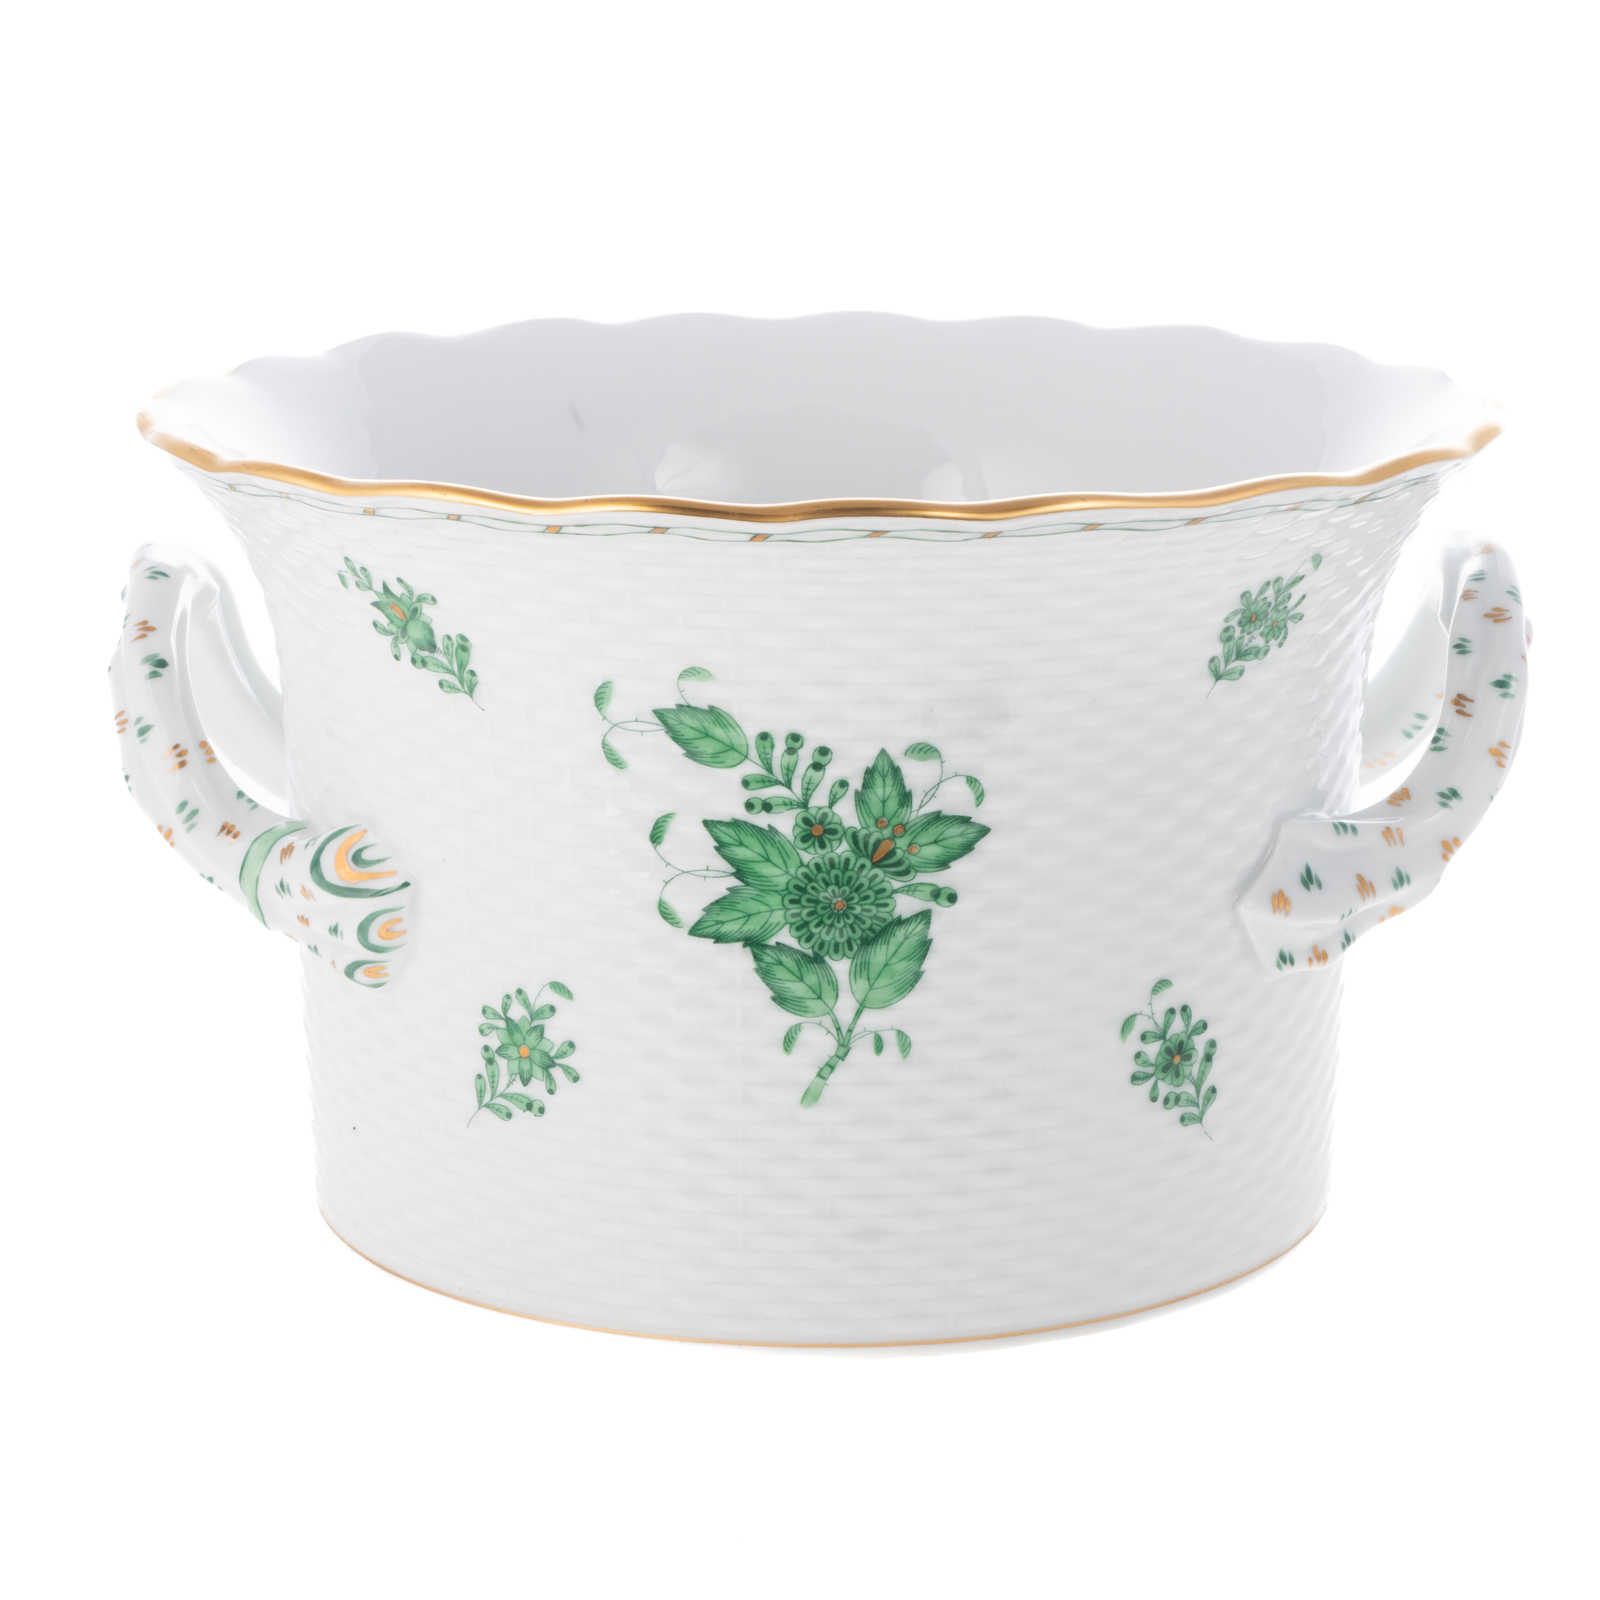 HEREND PORCELAIN CACHE POT In the